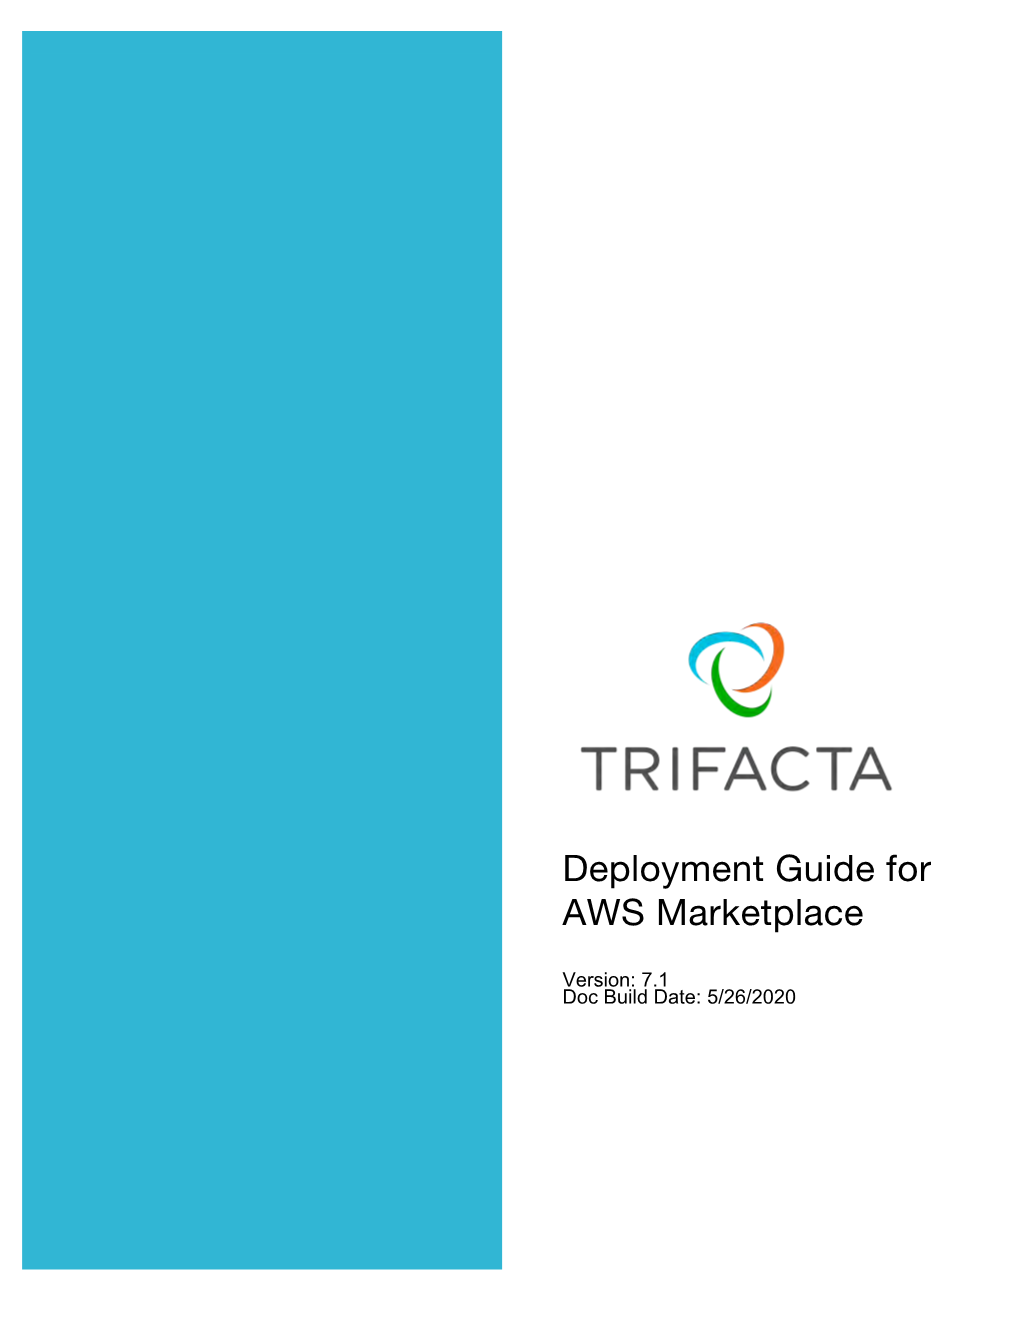 Trifacta Deployment Guide for AWS Marketplace